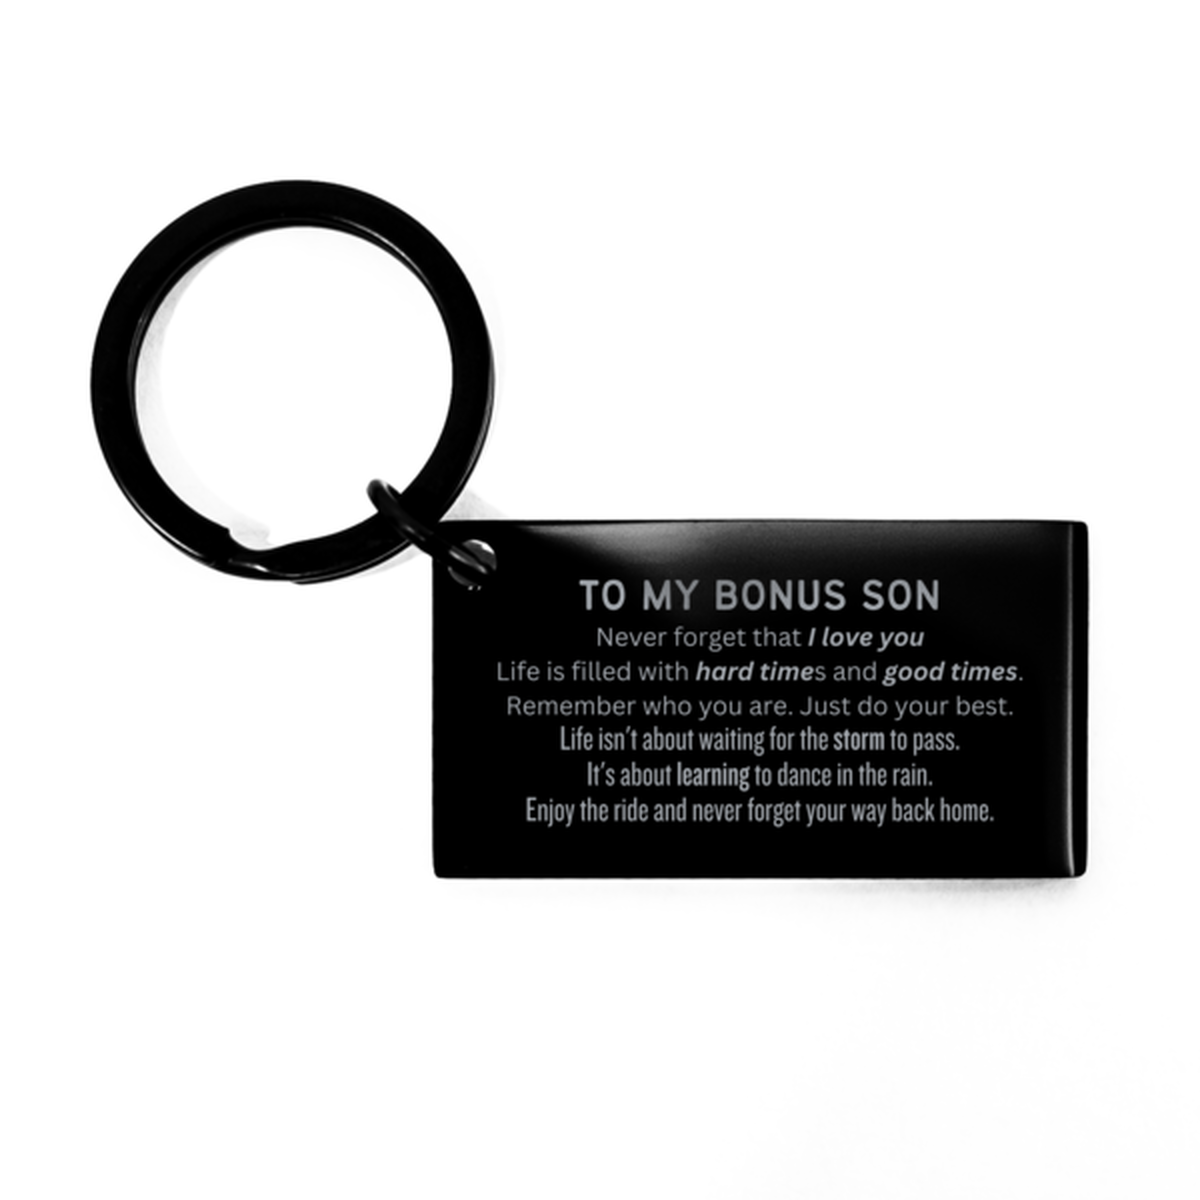 Christmas Bonus Son Keychain Gifts, To My Bonus Son Birthday Thank You Gifts For Bonus Son, Graduation Unique Gifts For Bonus Son To My Bonus Son Never forget that I love you life is filled with hard times and good times. Remember who you are. Just do you